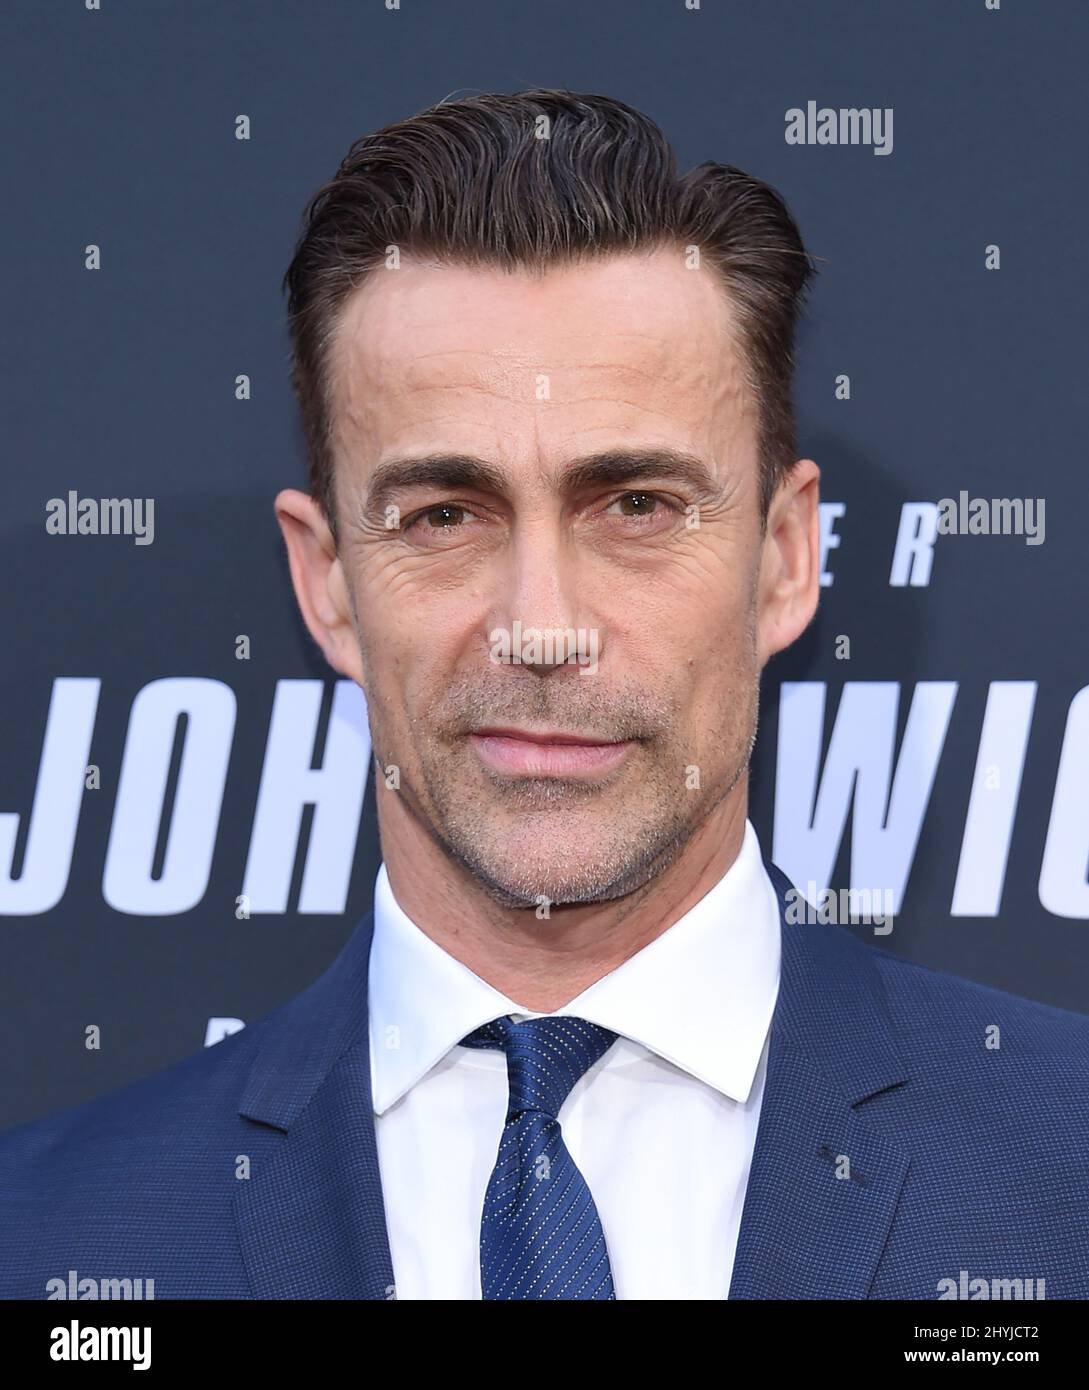 Daniel Bernhardt at the L.A. special screening of 'John Wick: Chapter 3 - Parabellum' held at the TCL Chinese Theatre Stock Photo